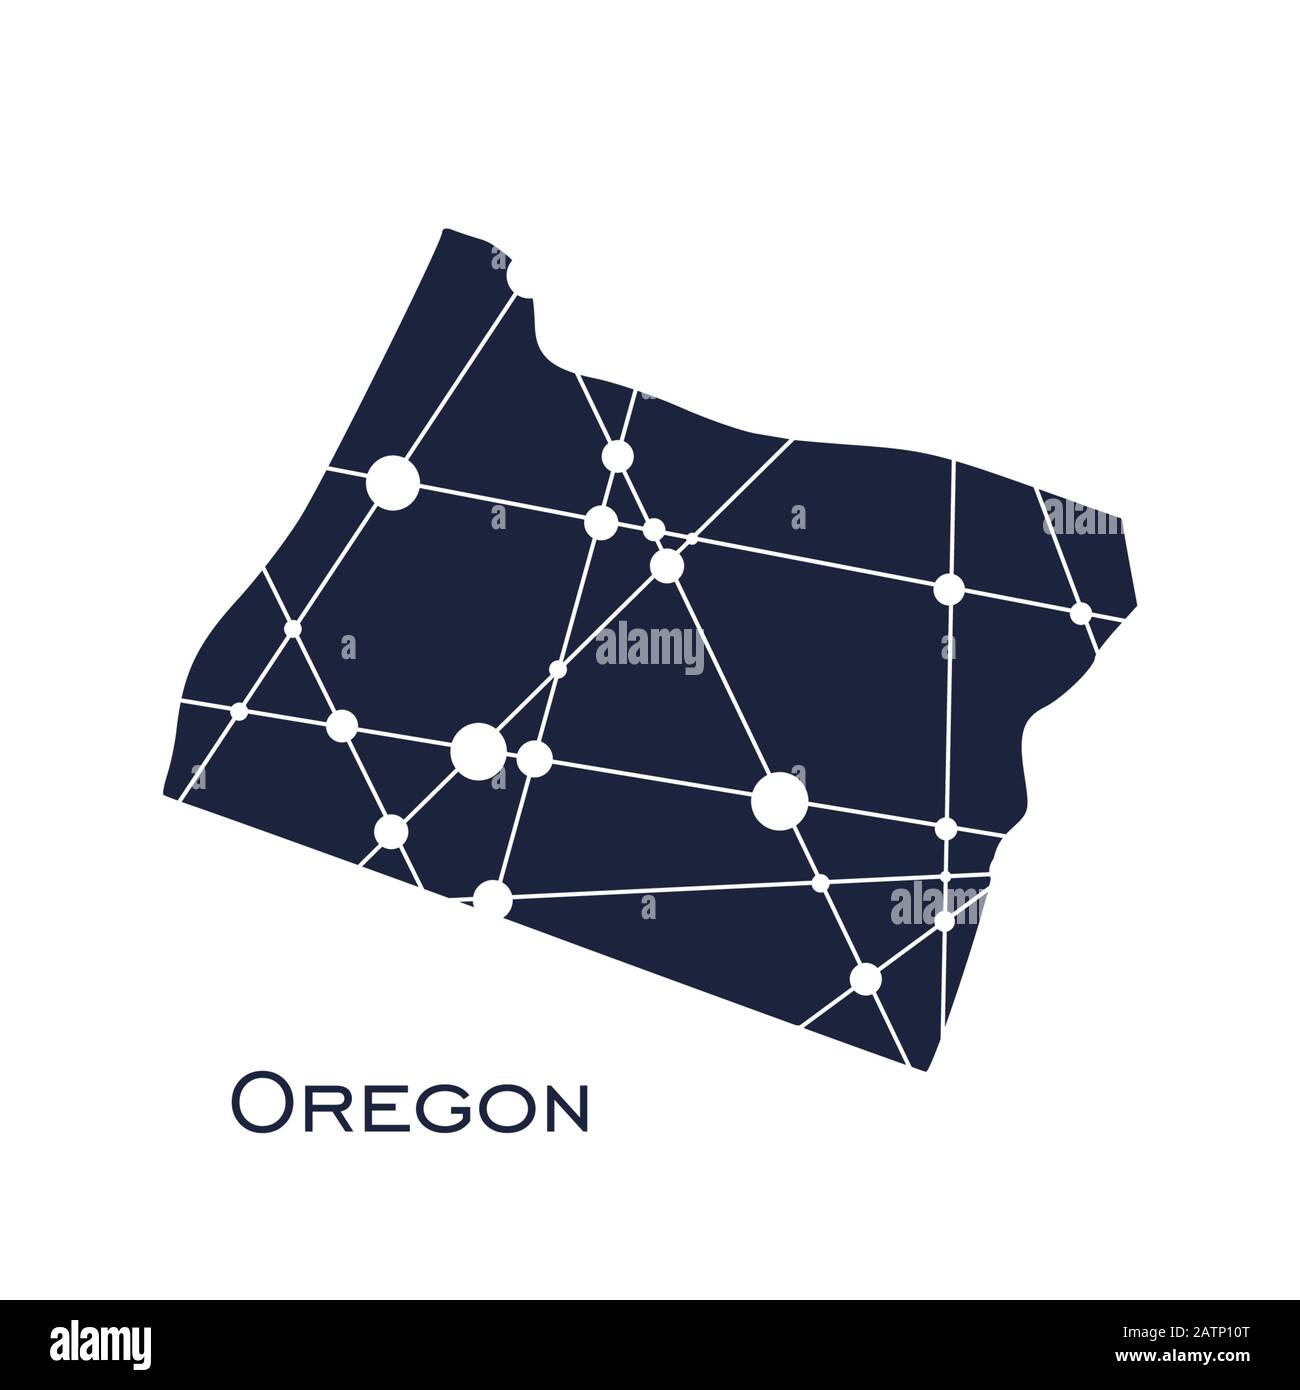 Oregon state map Stock Vector